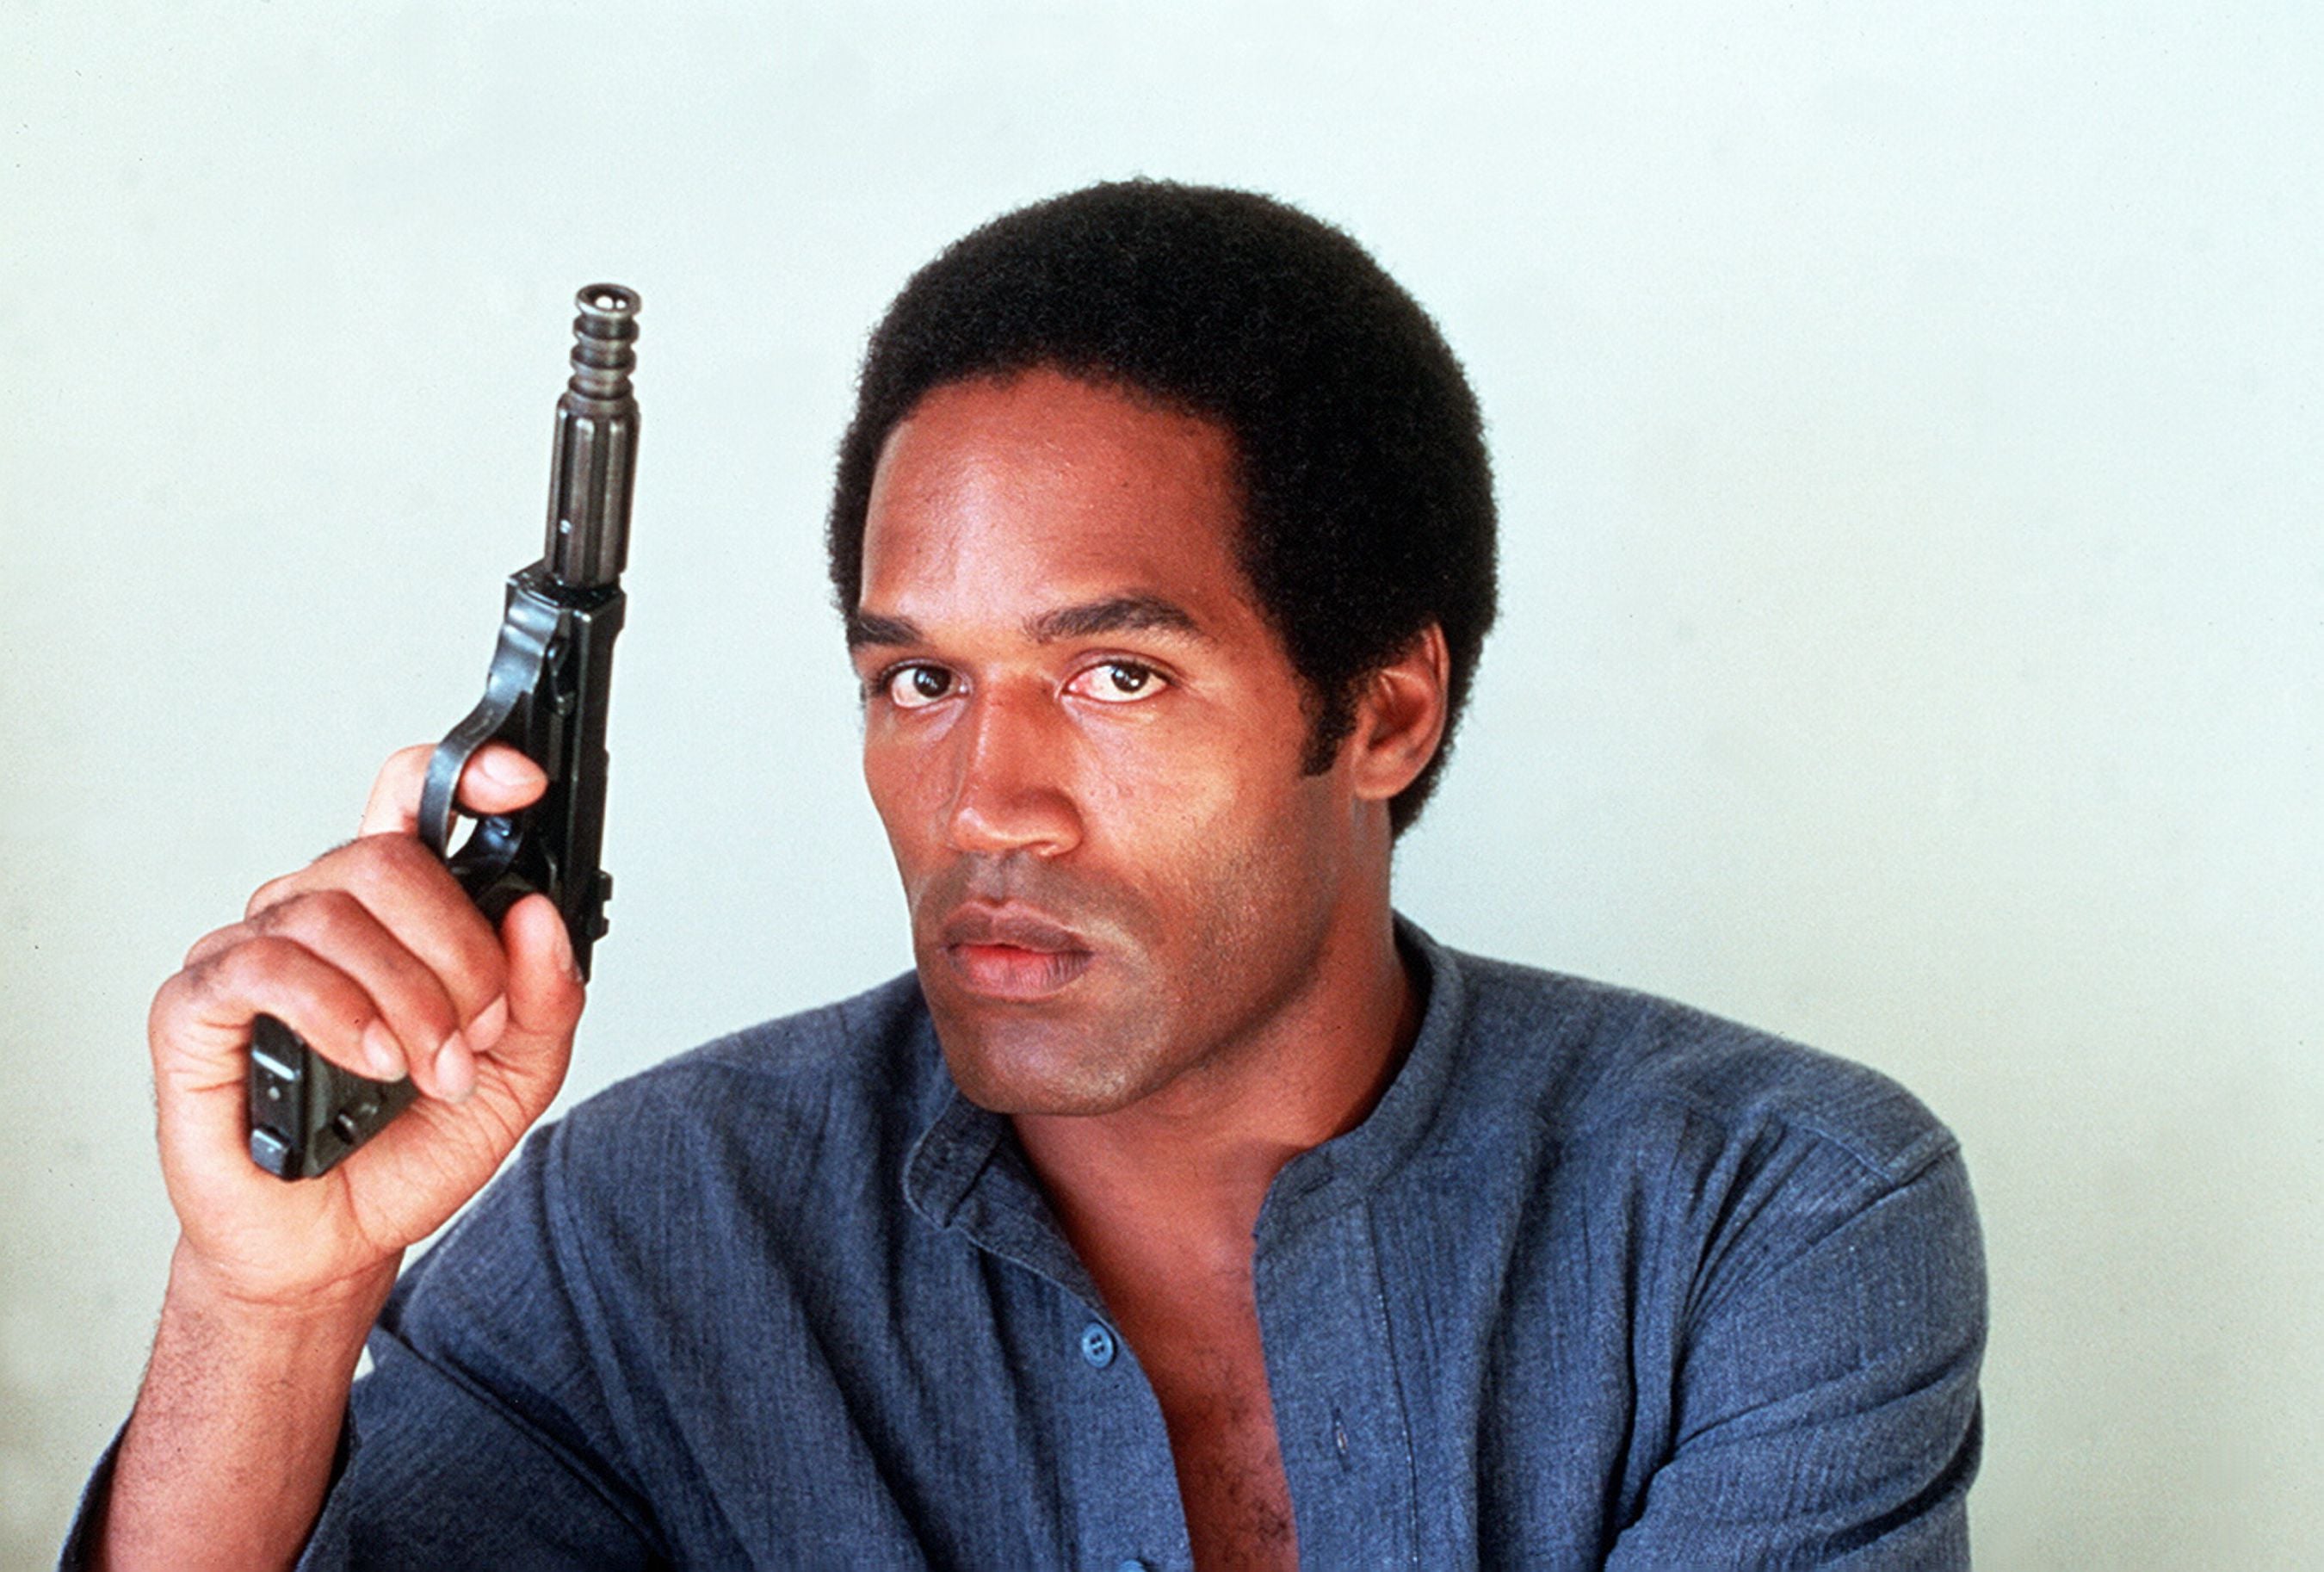 Simpson poses for ‘Firepower’ (1979)